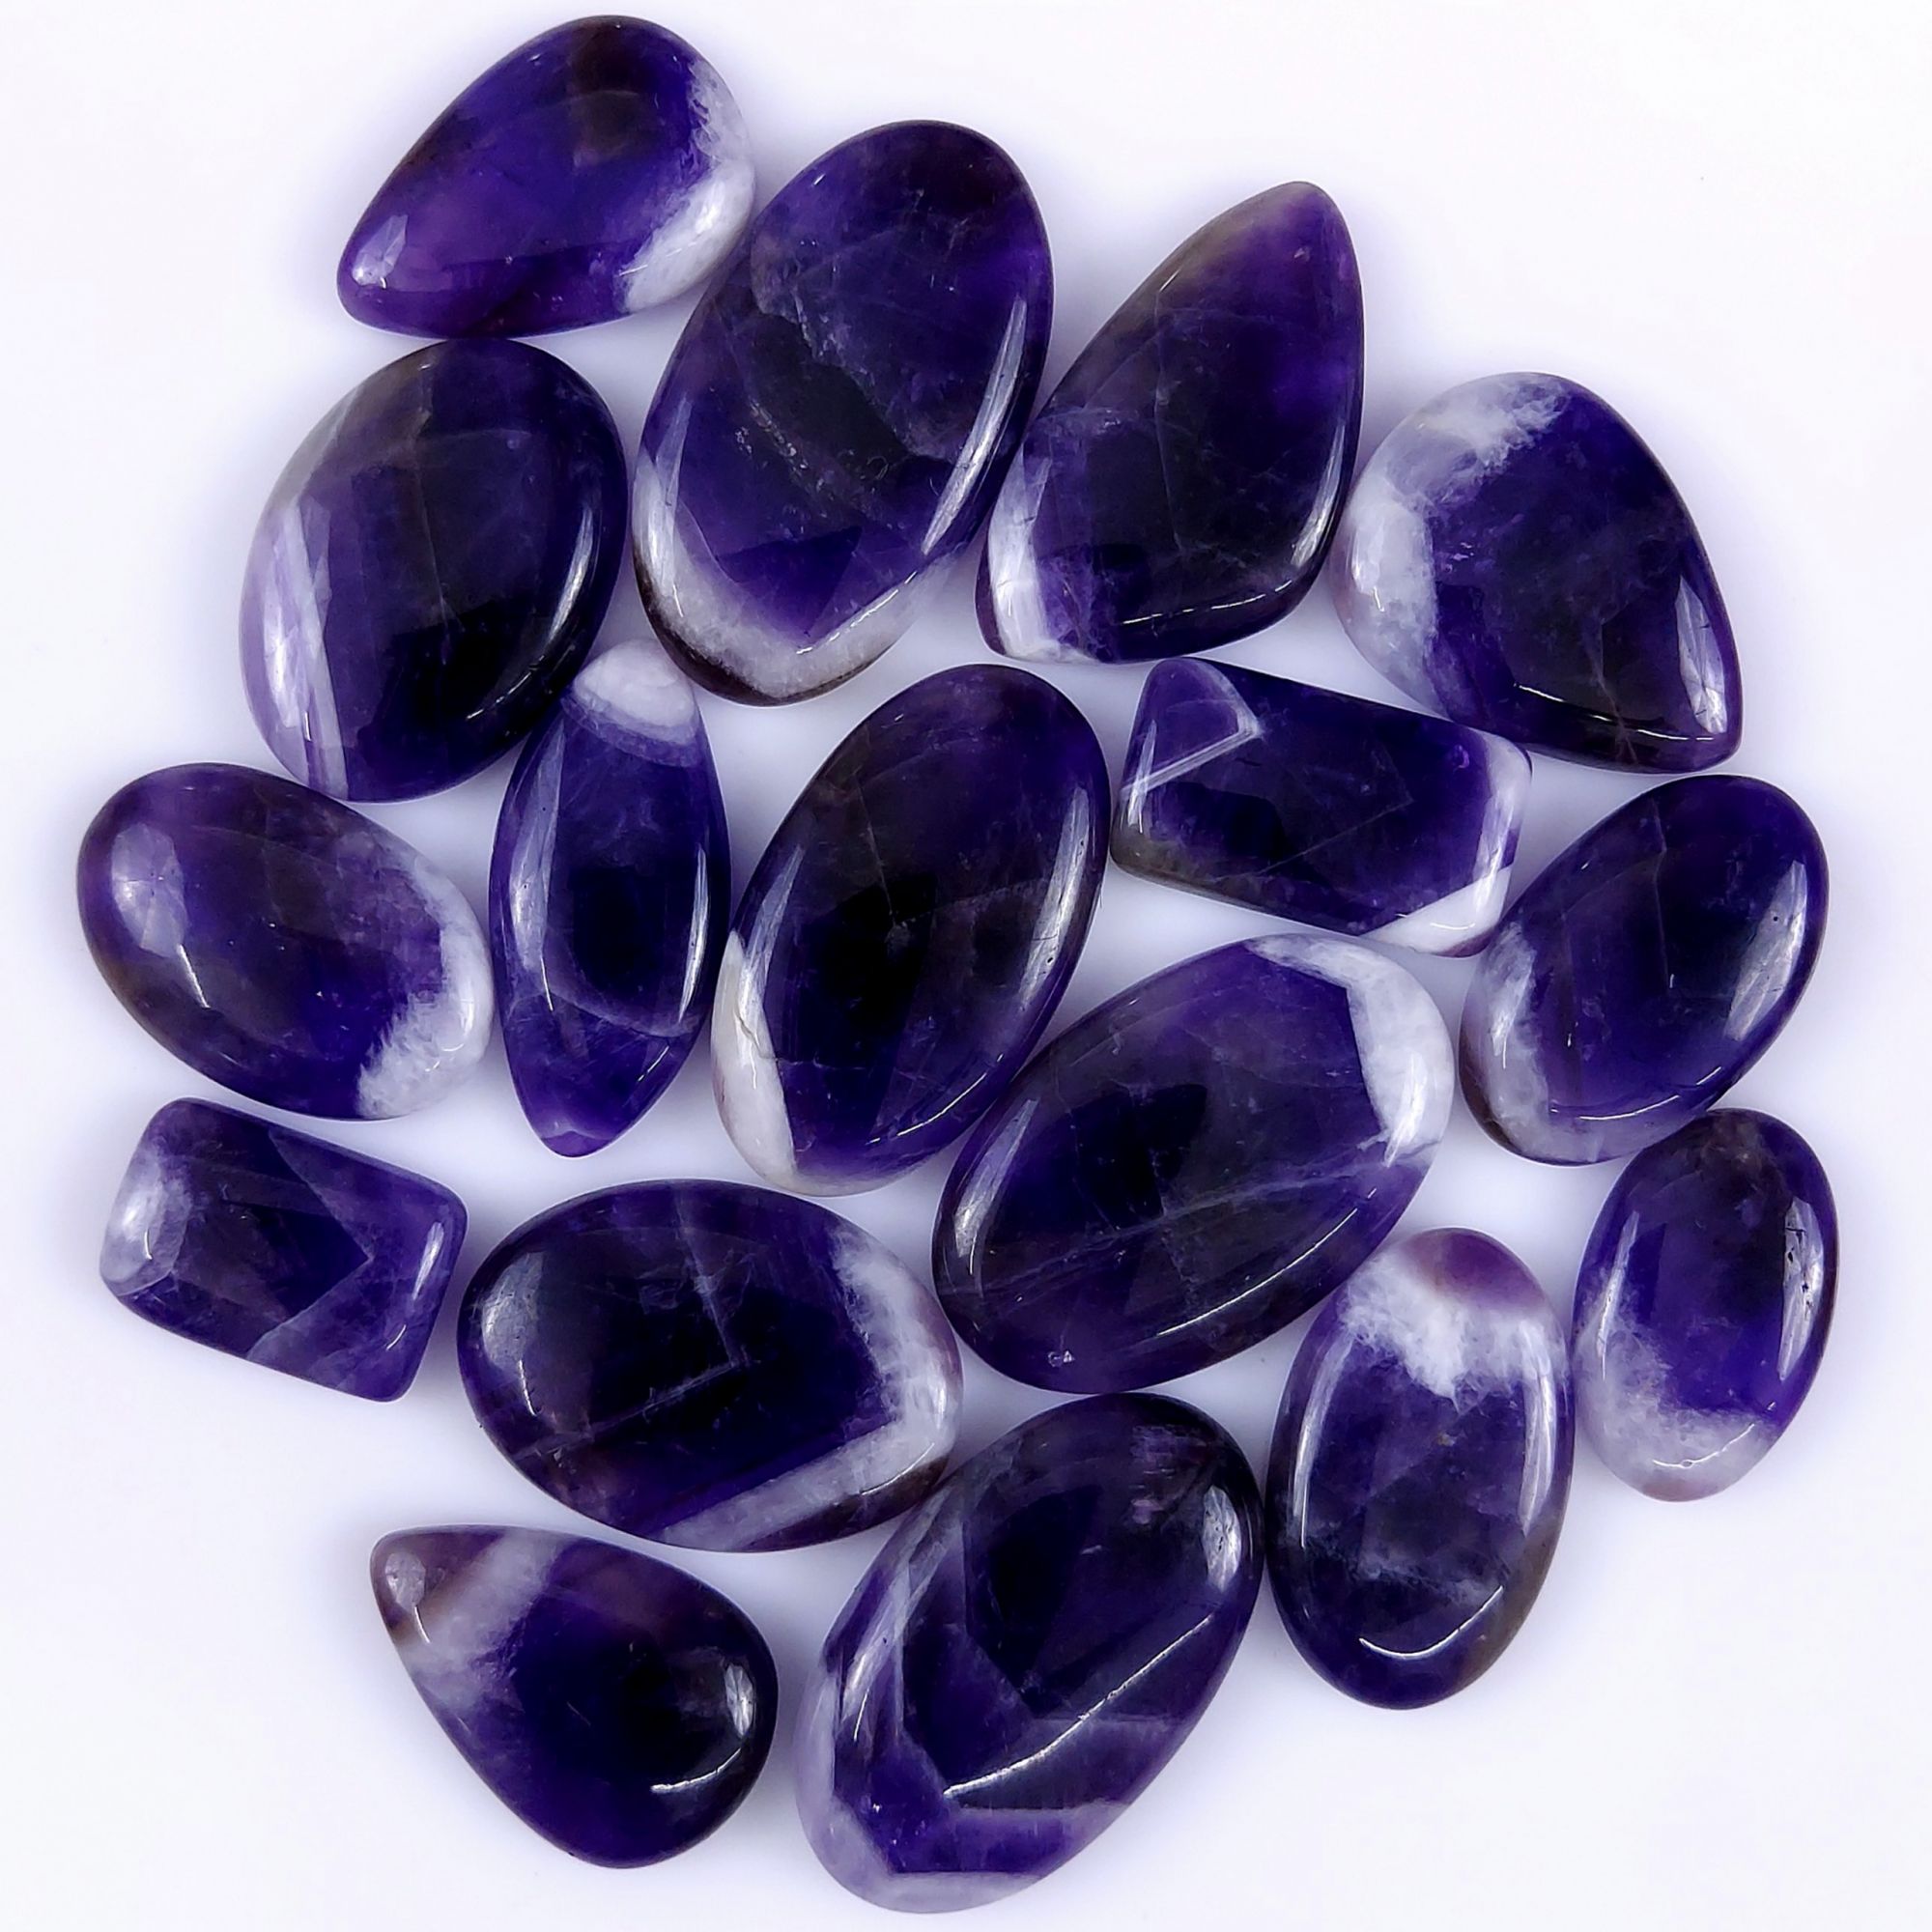 17Pcs 414Cts Natural Amethyst Cabochon lot Gemstone Purple Crystal Mix Shape Loose Gemstone beads for jewelry Making 36x20 20x14mm#7510